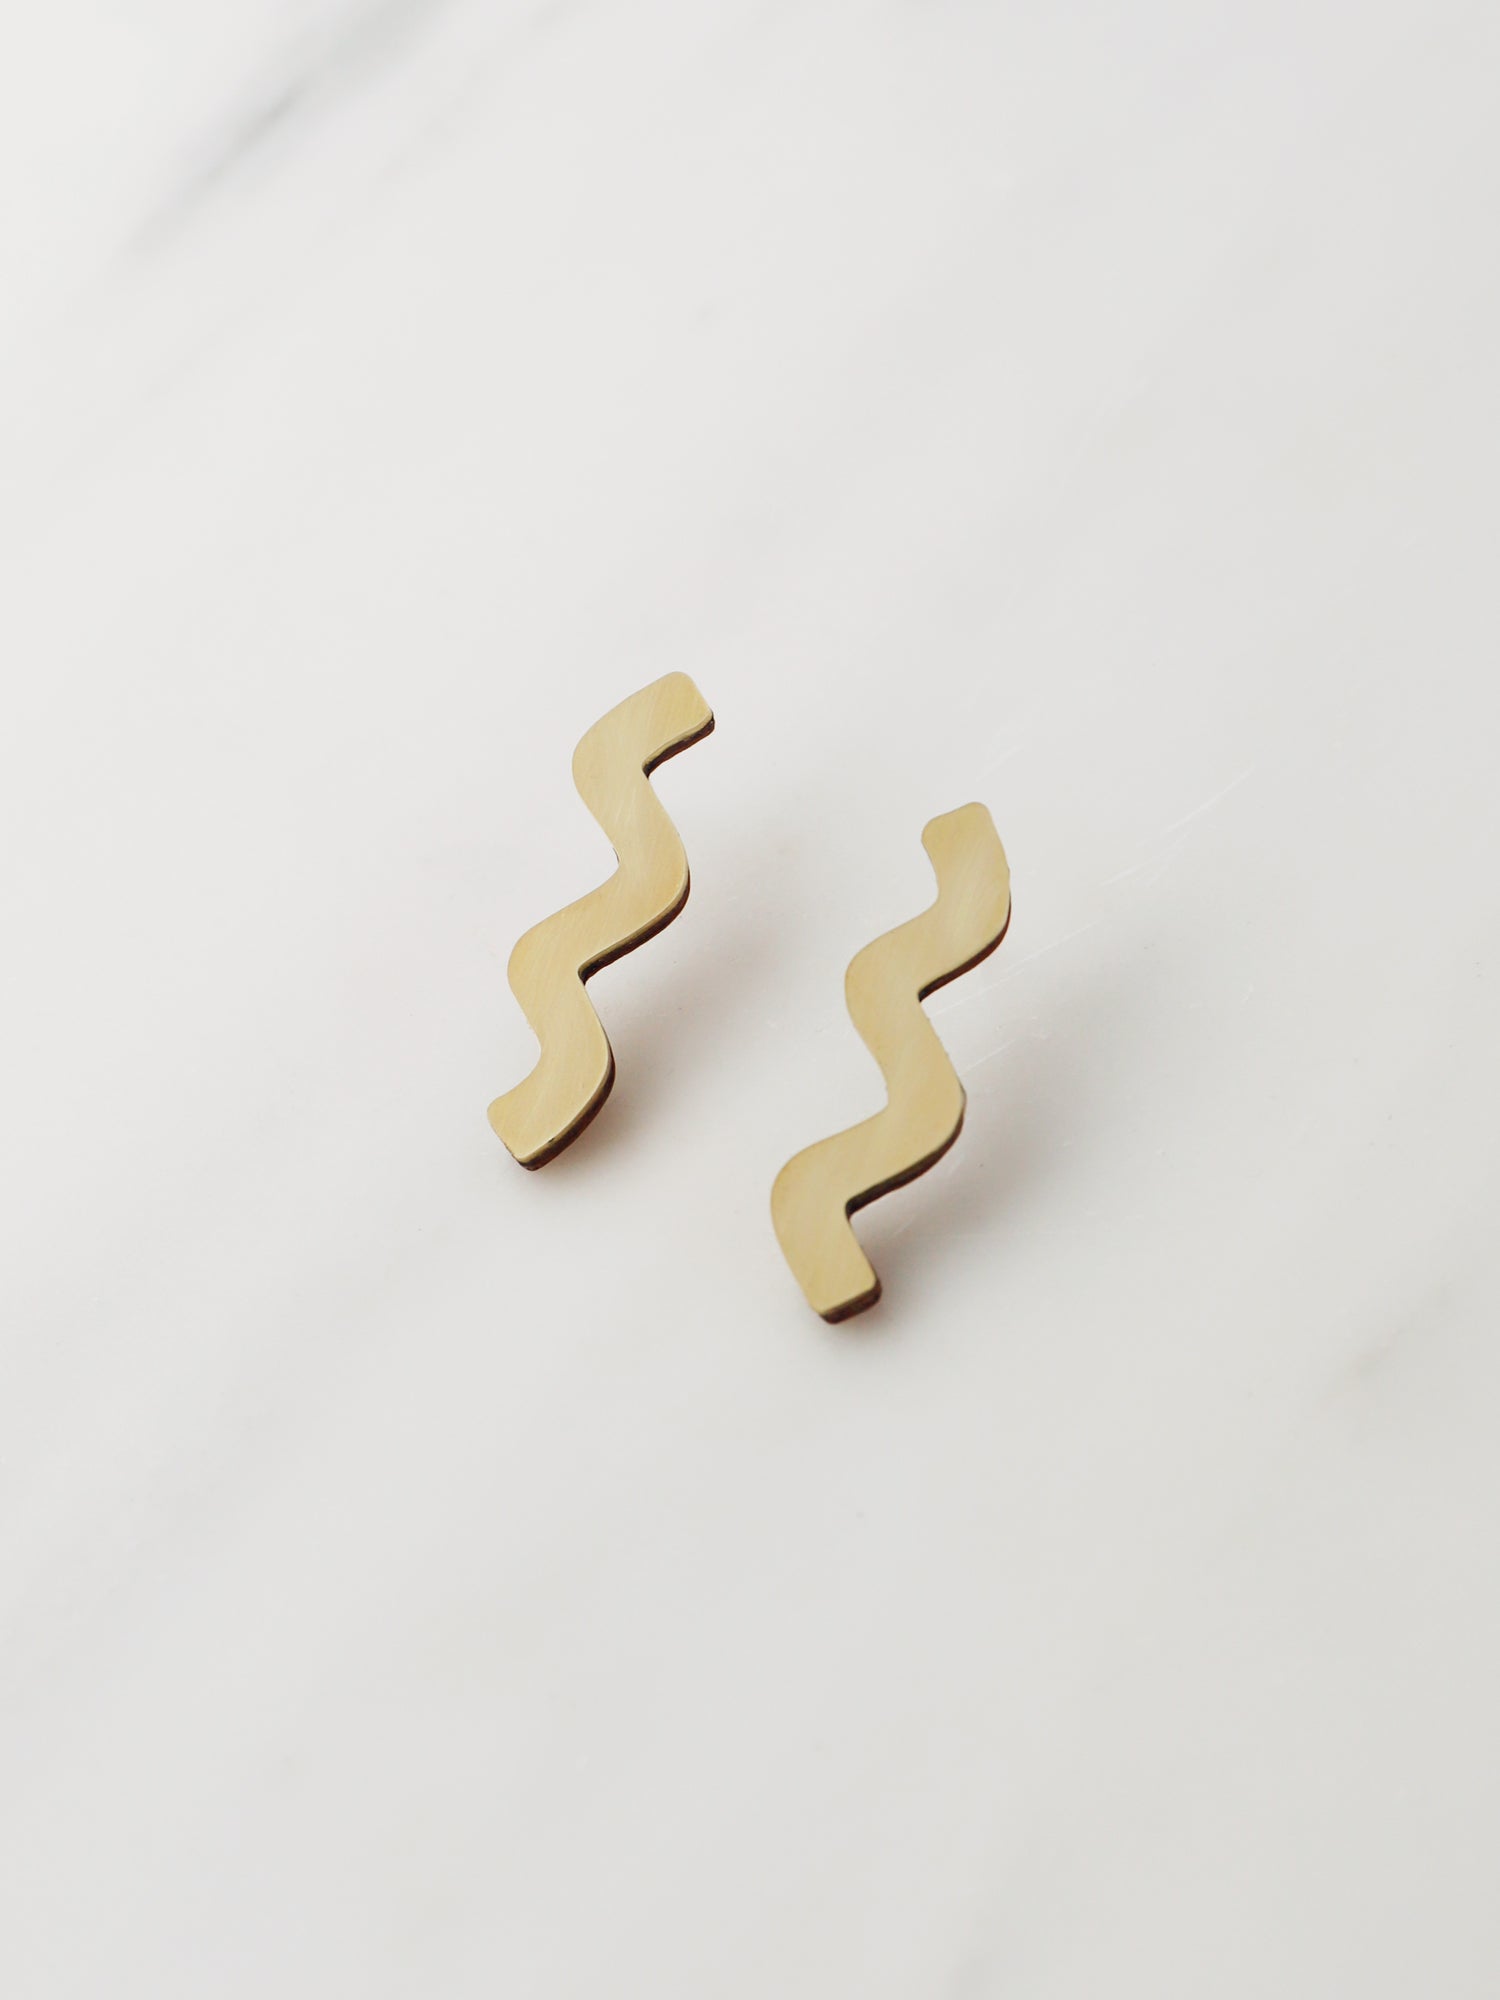 Playful wavy studs in brass with our signature wooden back and sterling silver earring posts. Handmade in the UK by Wolf & Moon.